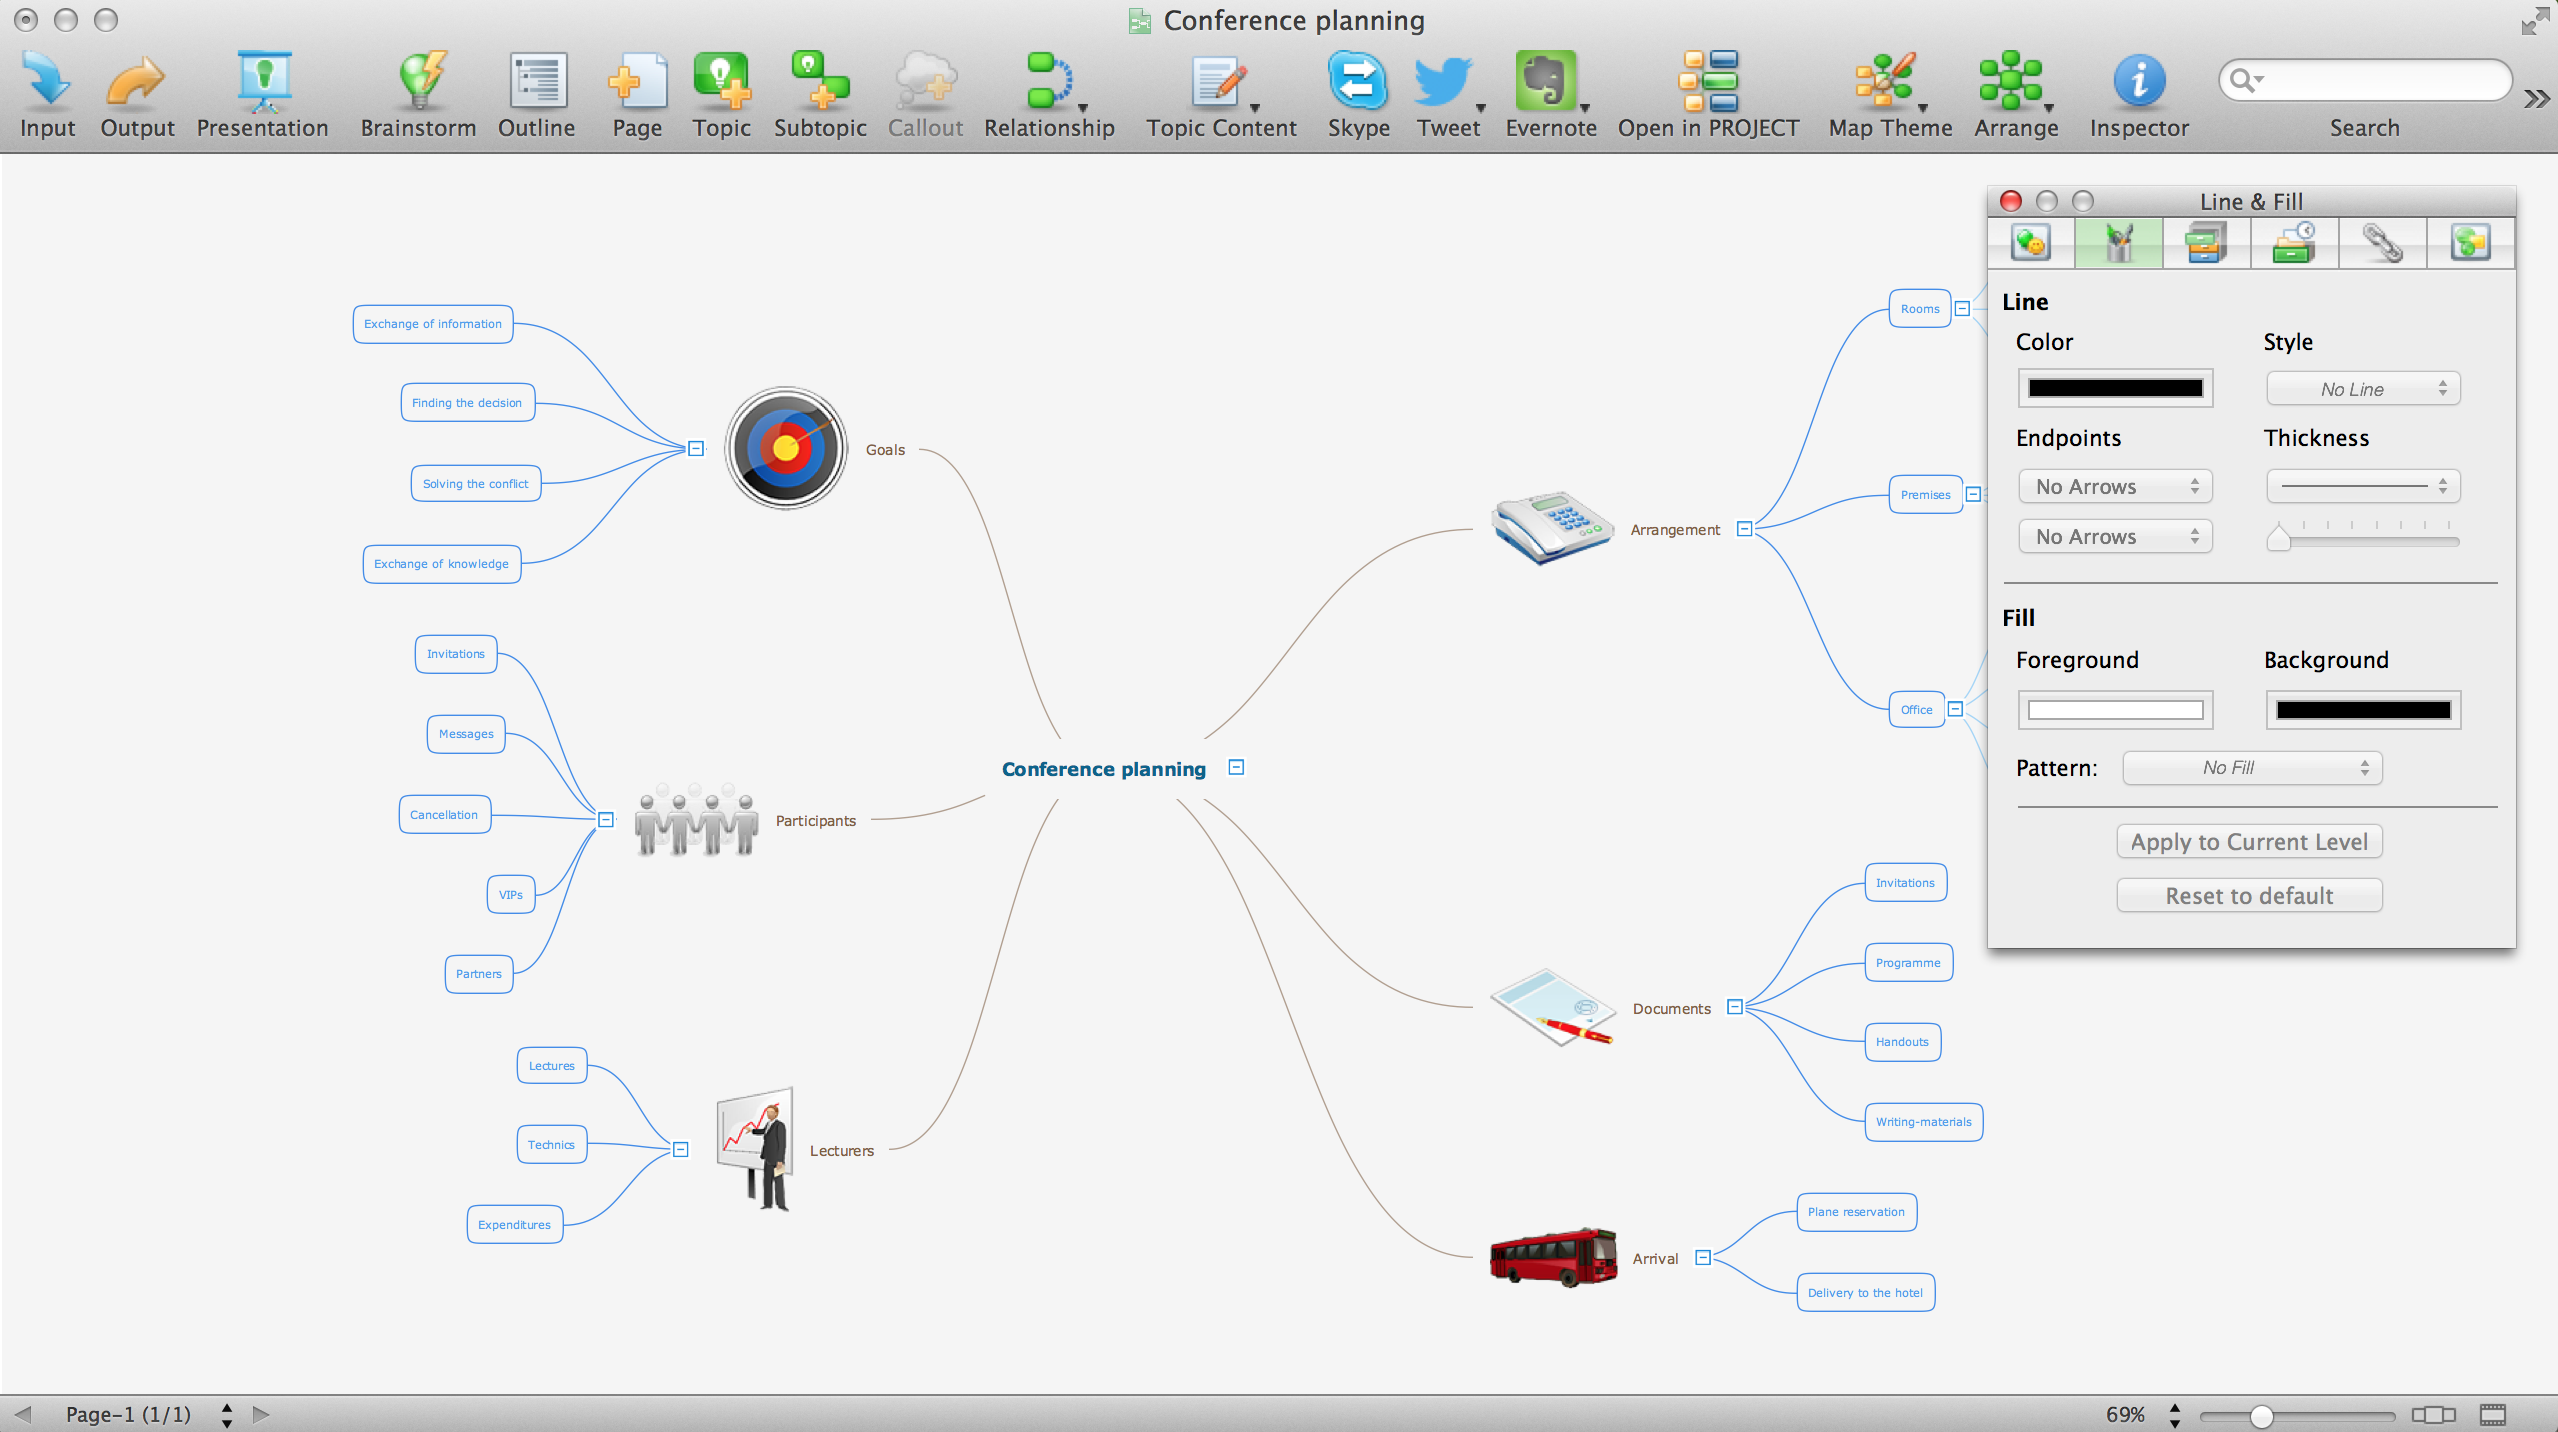 instal the new version for mac Concept Draw Office 10.0.0.0 + MINDMAP 15.0.0.275